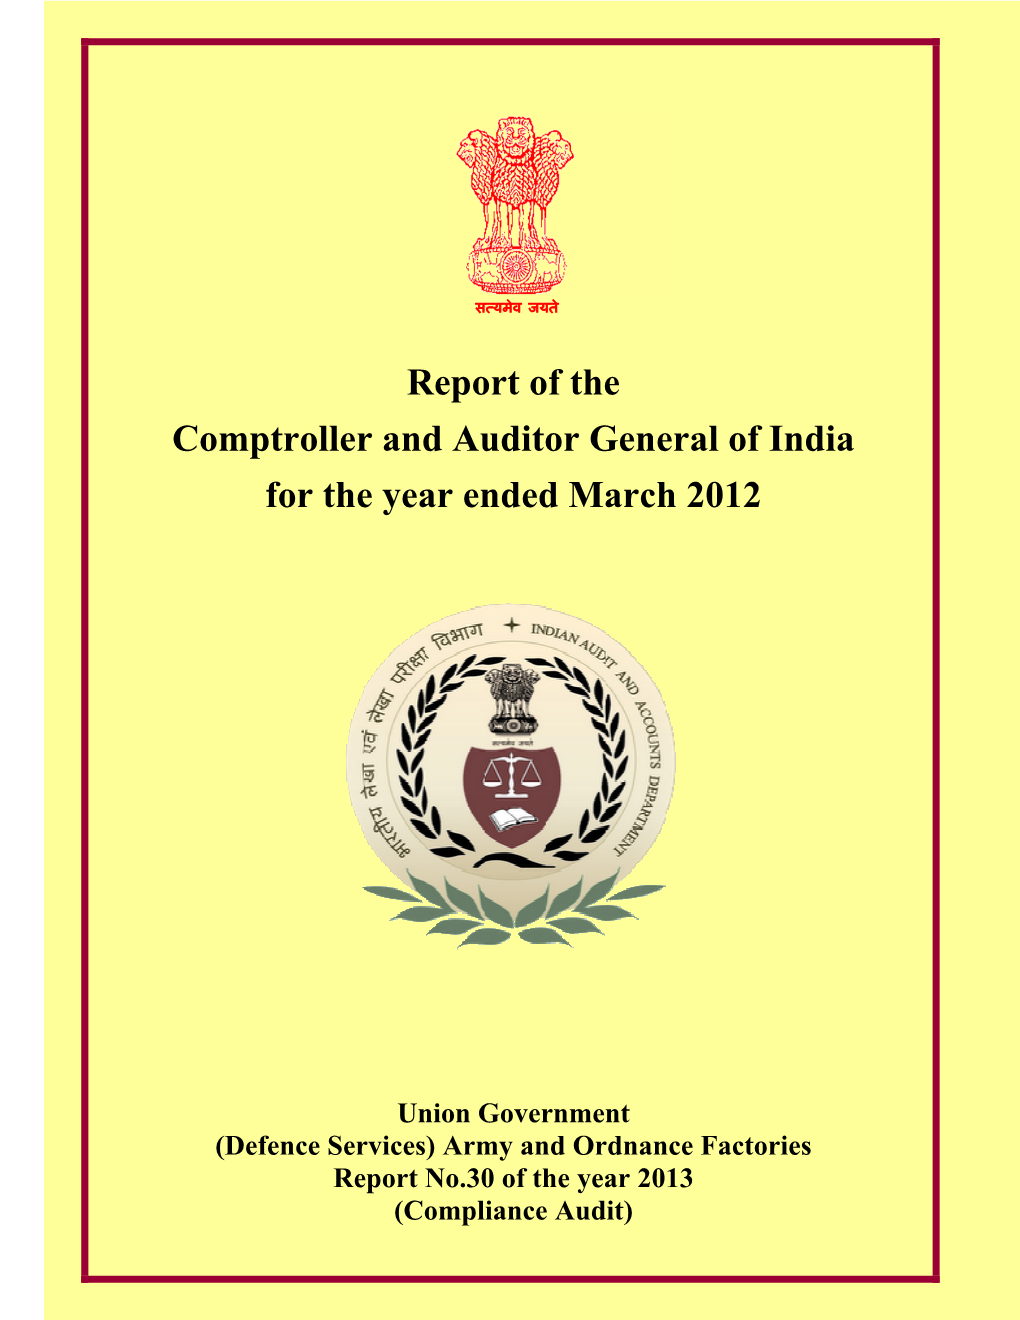 Report of the Comptroller and Auditor General of India for the Year Ended March 2012